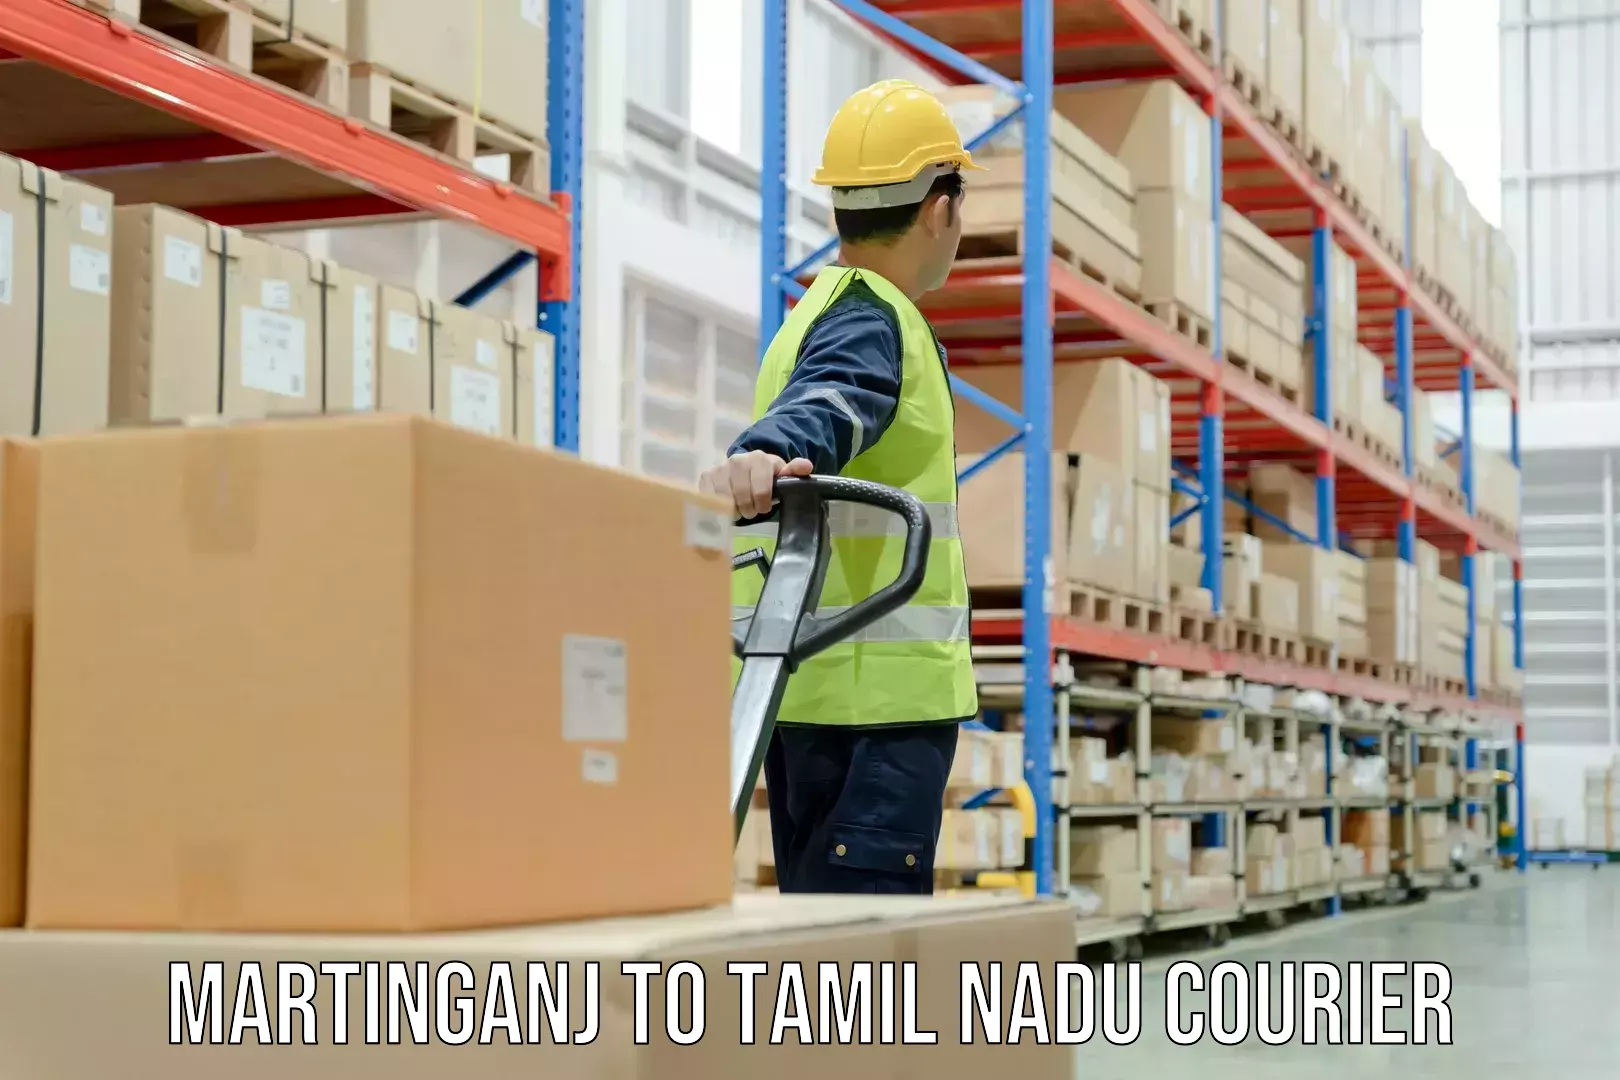 Residential courier service Martinganj to Tamil Nadu